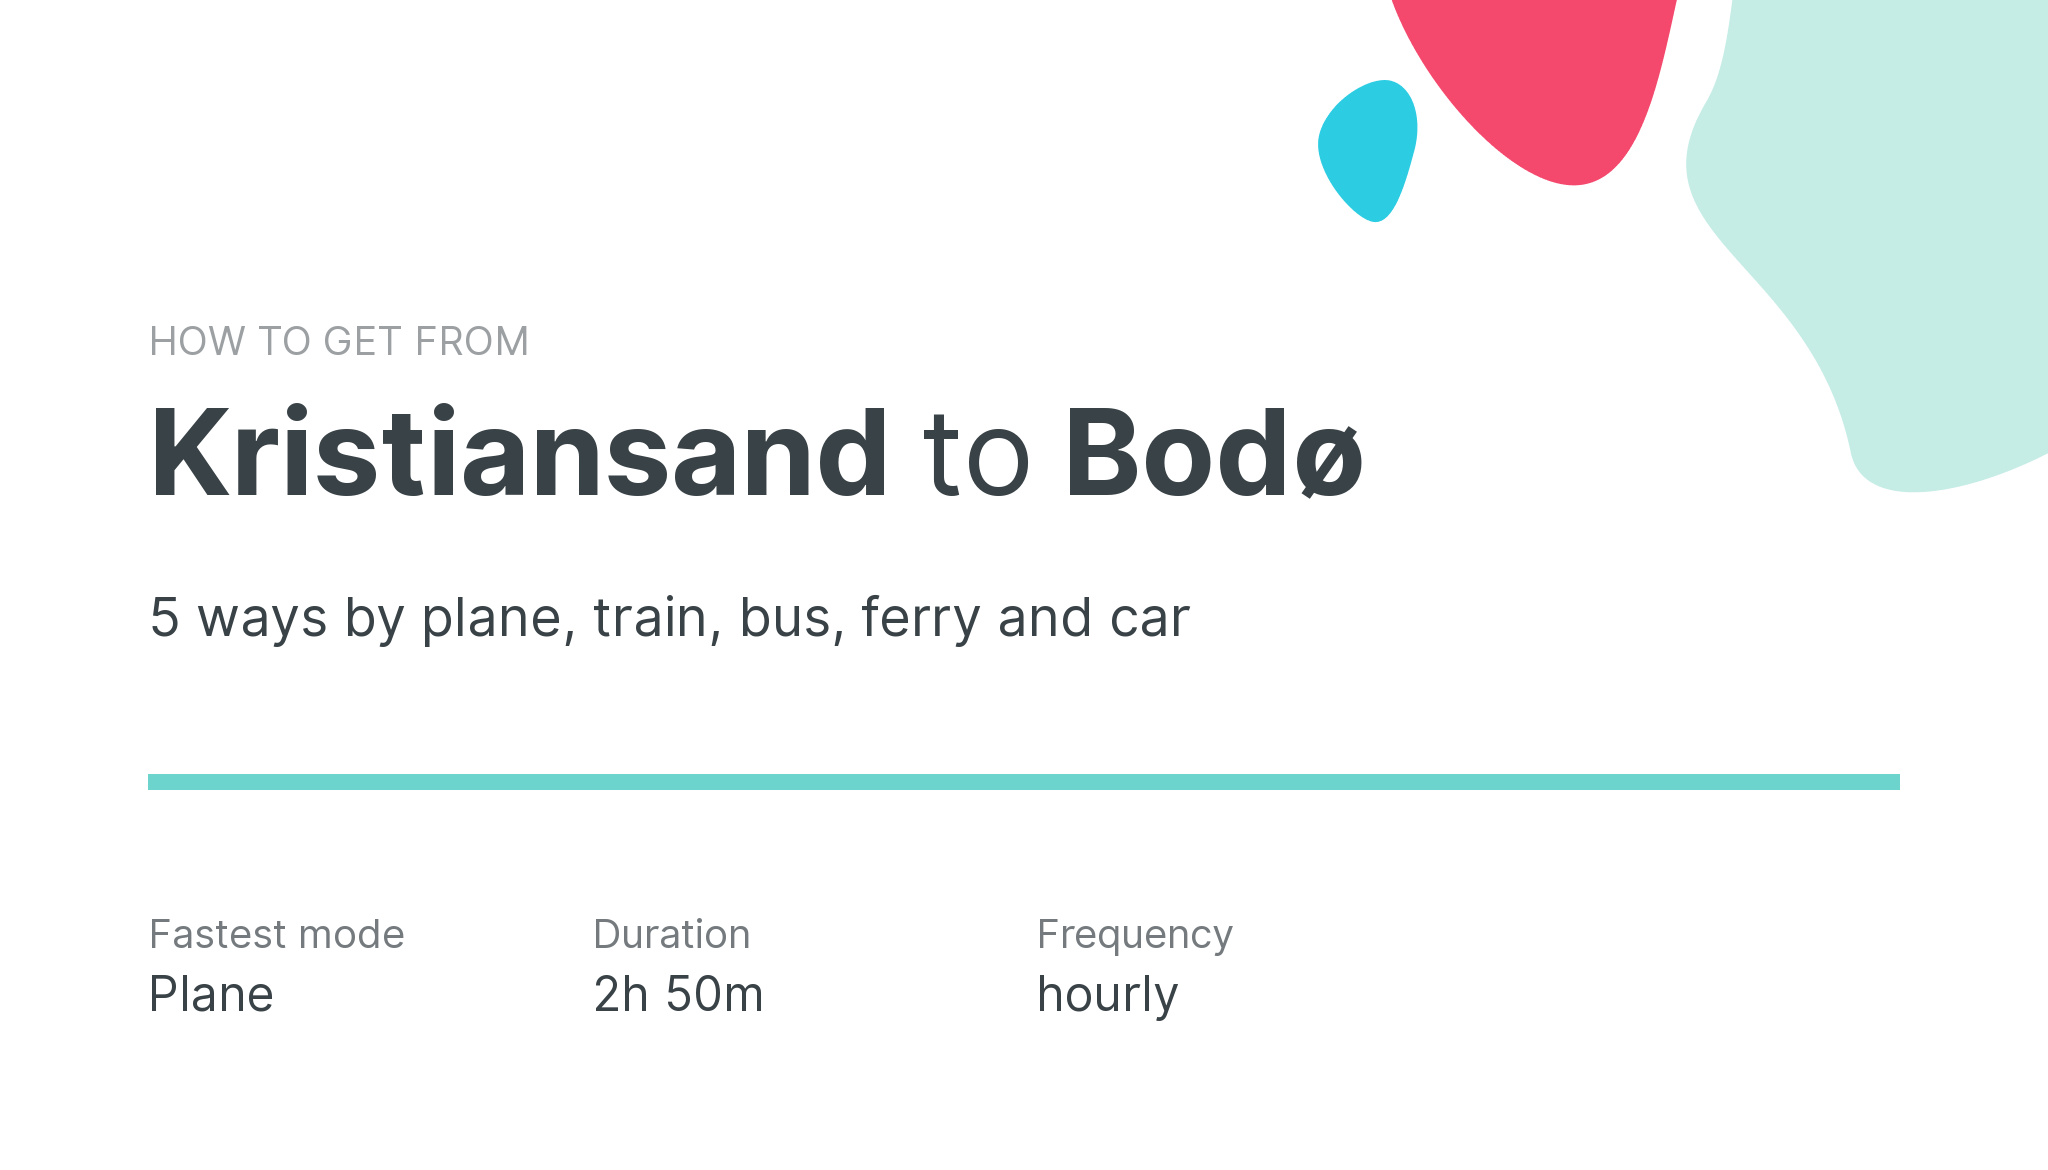 How do I get from Kristiansand to Bodø